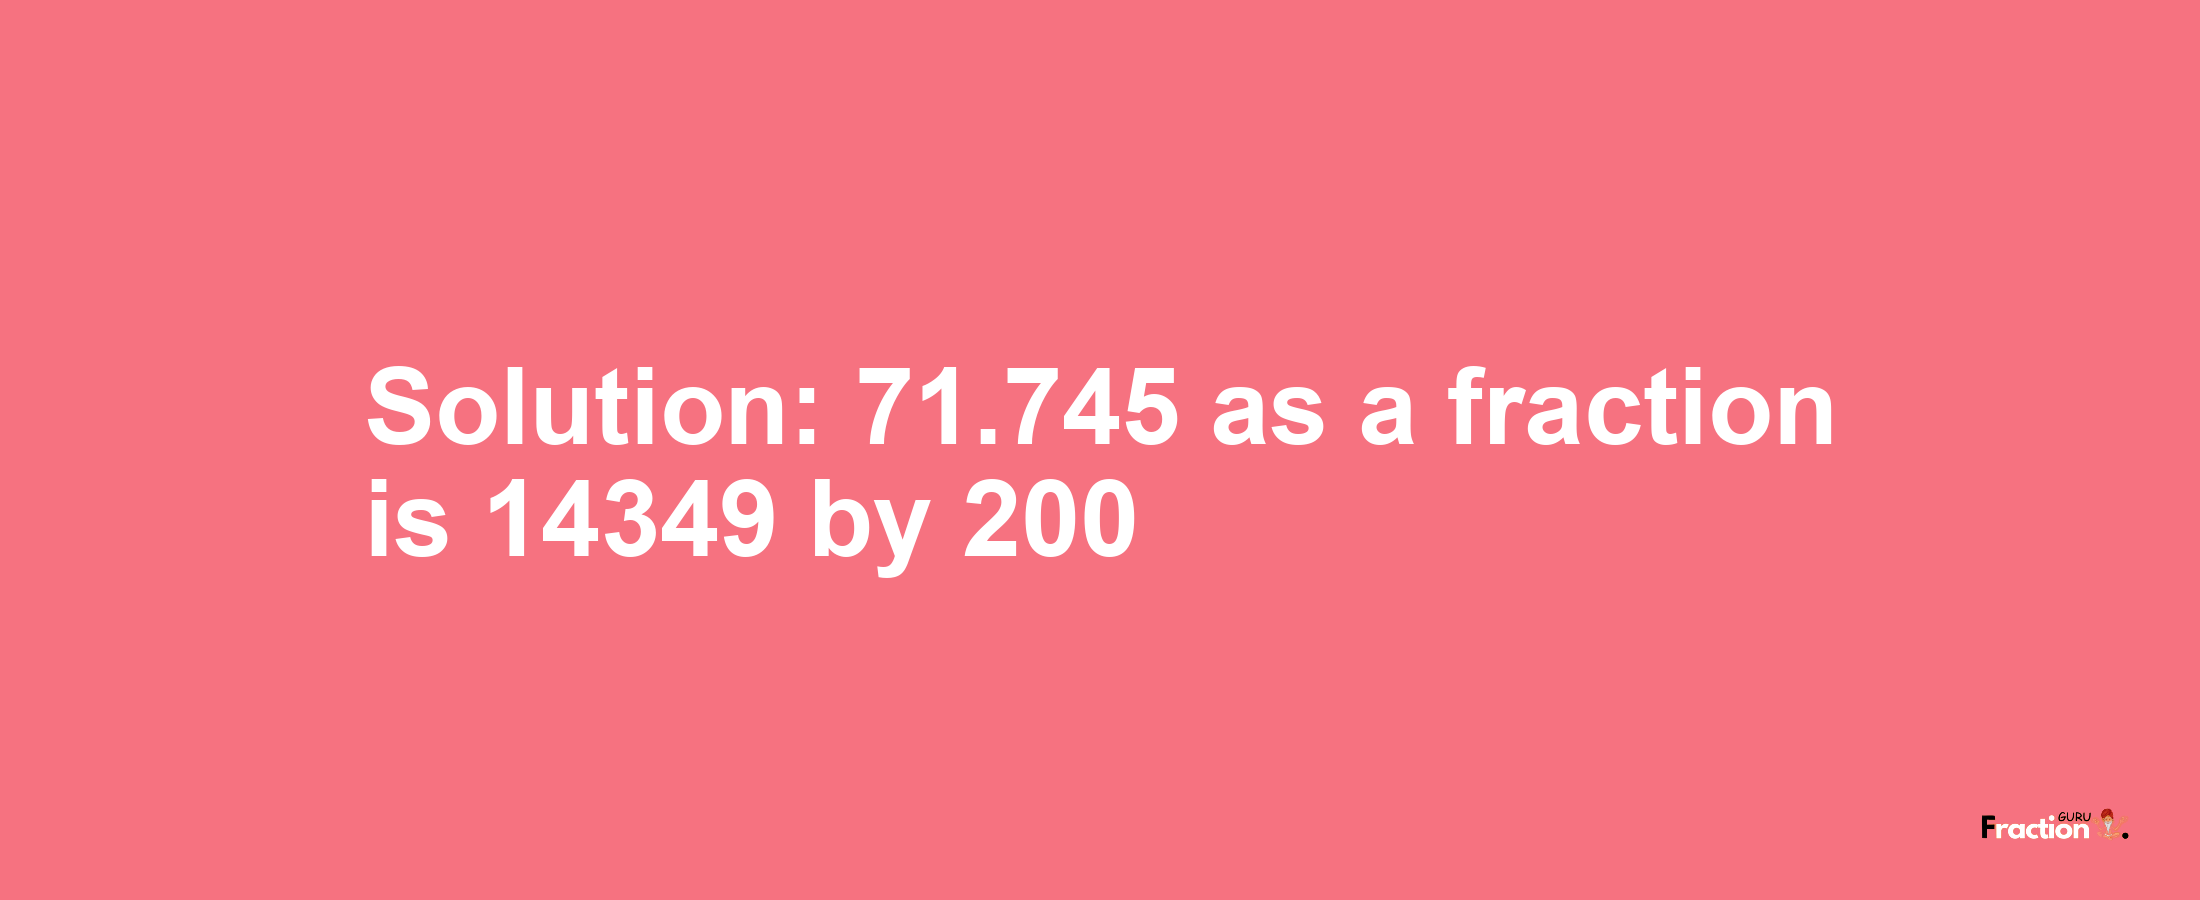 Solution:71.745 as a fraction is 14349/200